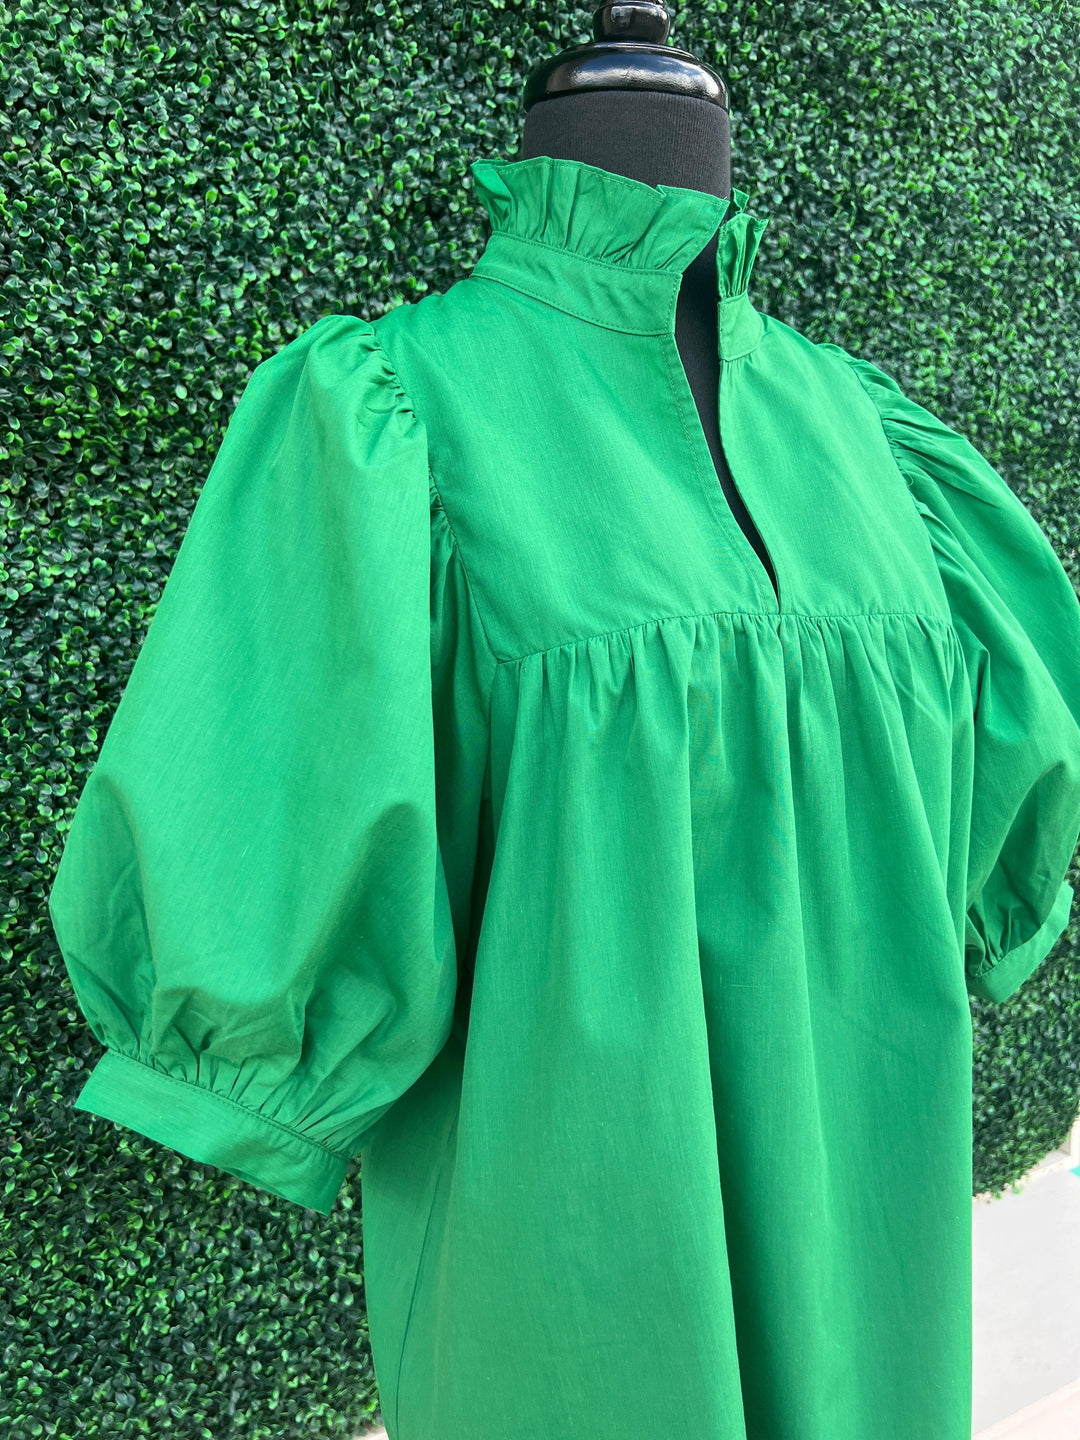 top like never a wallflower tres chic boutique jade and joy joy brand cotton top green blouse v neck